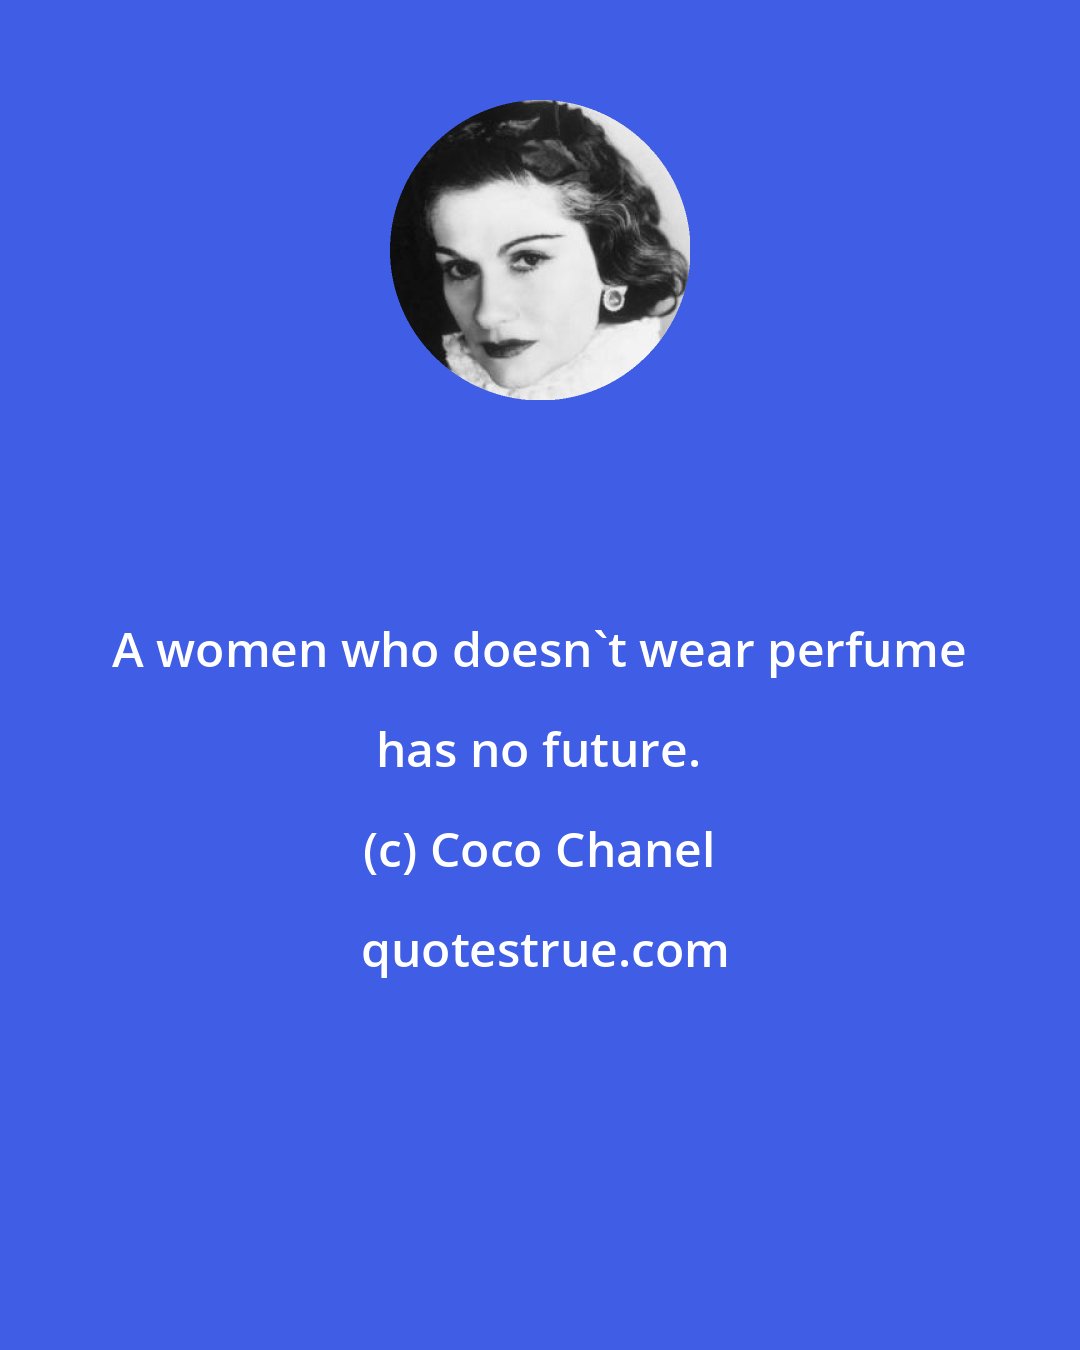 Coco Chanel: A women who doesn't wear perfume has no future.